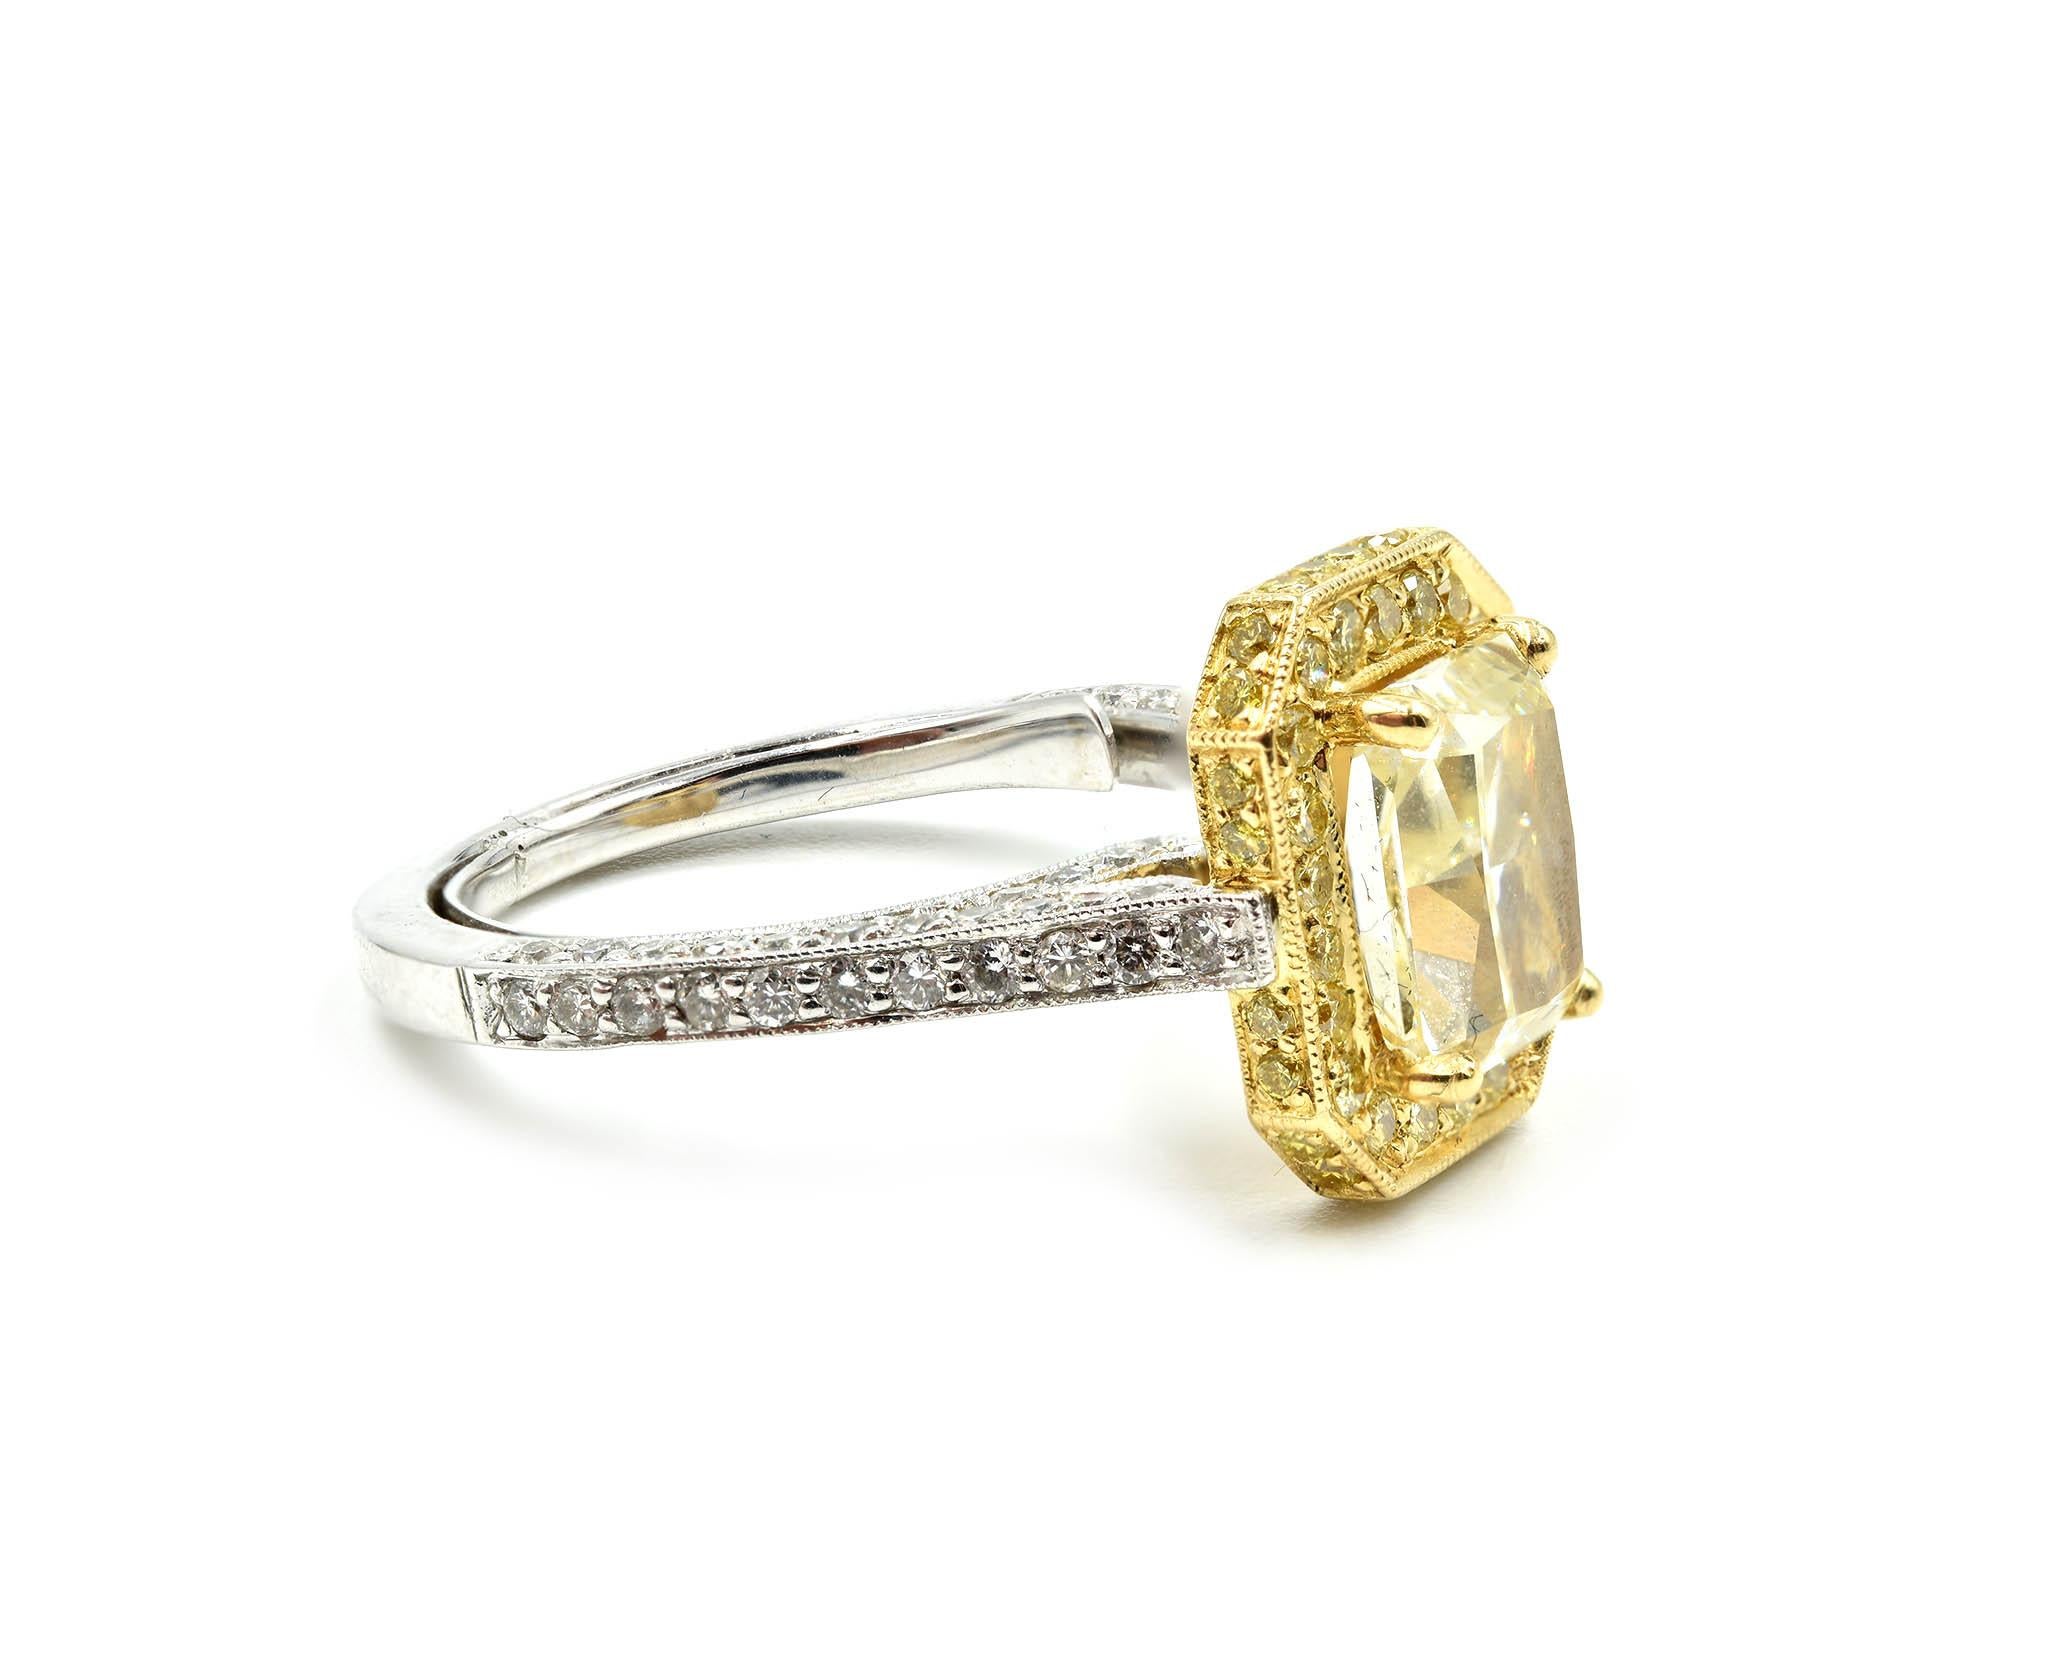 Designer: custom design
Material: 18k white and yellow gold
Center Stone: 2.01 carat fancy light yellow radiant cut diamond
Color: fancy light yellow
Clarity: VS1
Diamonds: 1.09 carat weight
Color: F-H
Clarity: SI1-SI2
Carat Total Weight: 3.10 carat